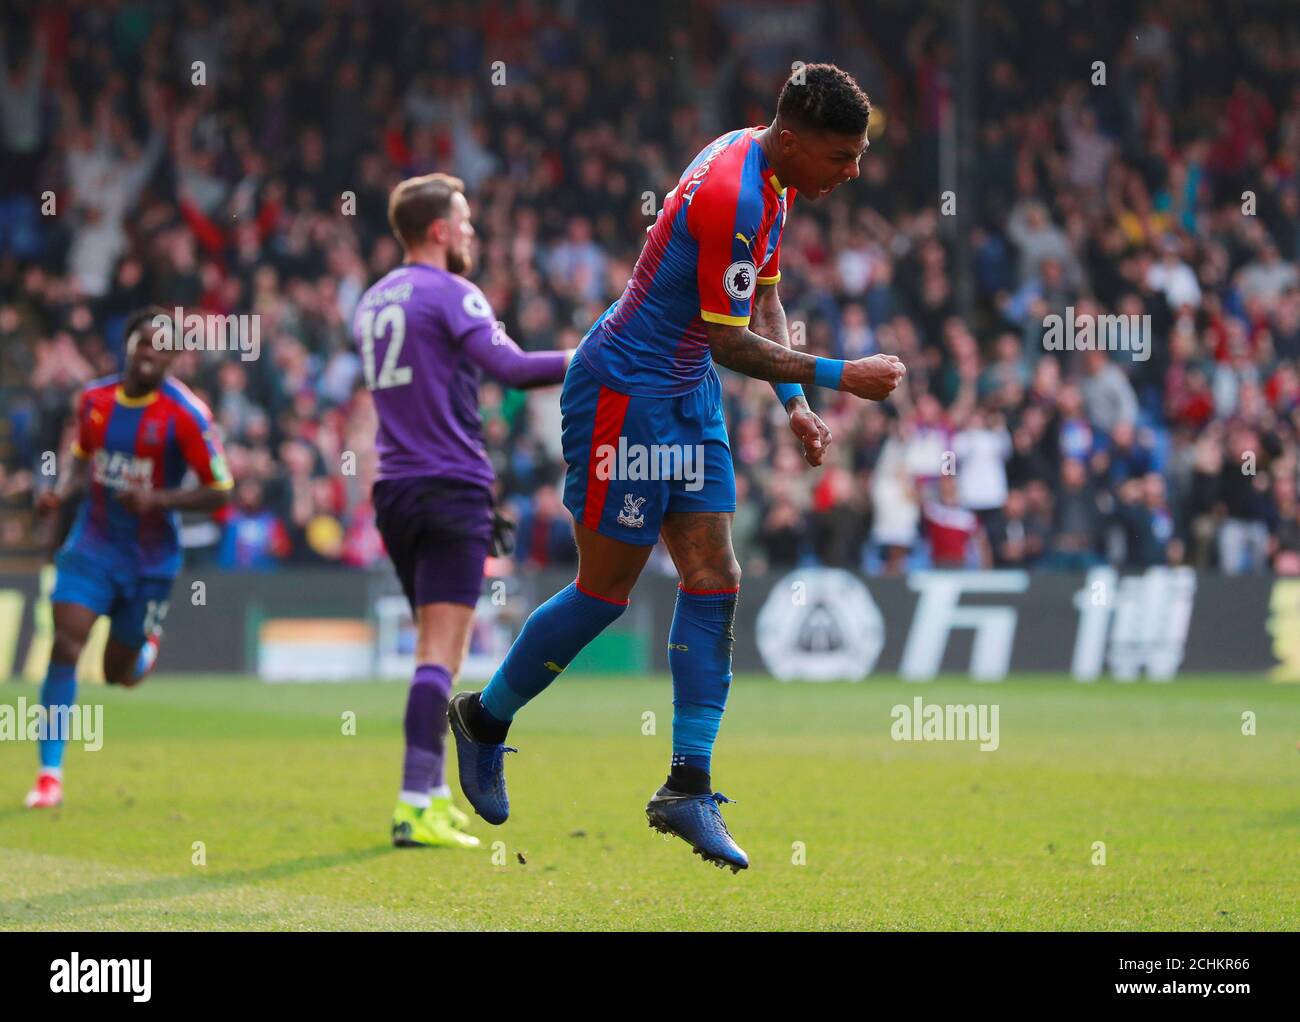 Soccer Football - Premier League - Crystal Palace v Huddersfield Town - Selhurst Park, London, Britain - March 30, 2019  Crystal Palace's Patrick van Aanholt celebrates scoring their second goal    Action Images via Reuters/Andrew Couldridge  EDITORIAL USE ONLY. No use with unauthorized audio, video, data, fixture lists, club/league logos or 'live' services. Online in-match use limited to 75 images, no video emulation. No use in betting, games or single club/league/player publications.  Please contact your account representative for further details. Stock Photo